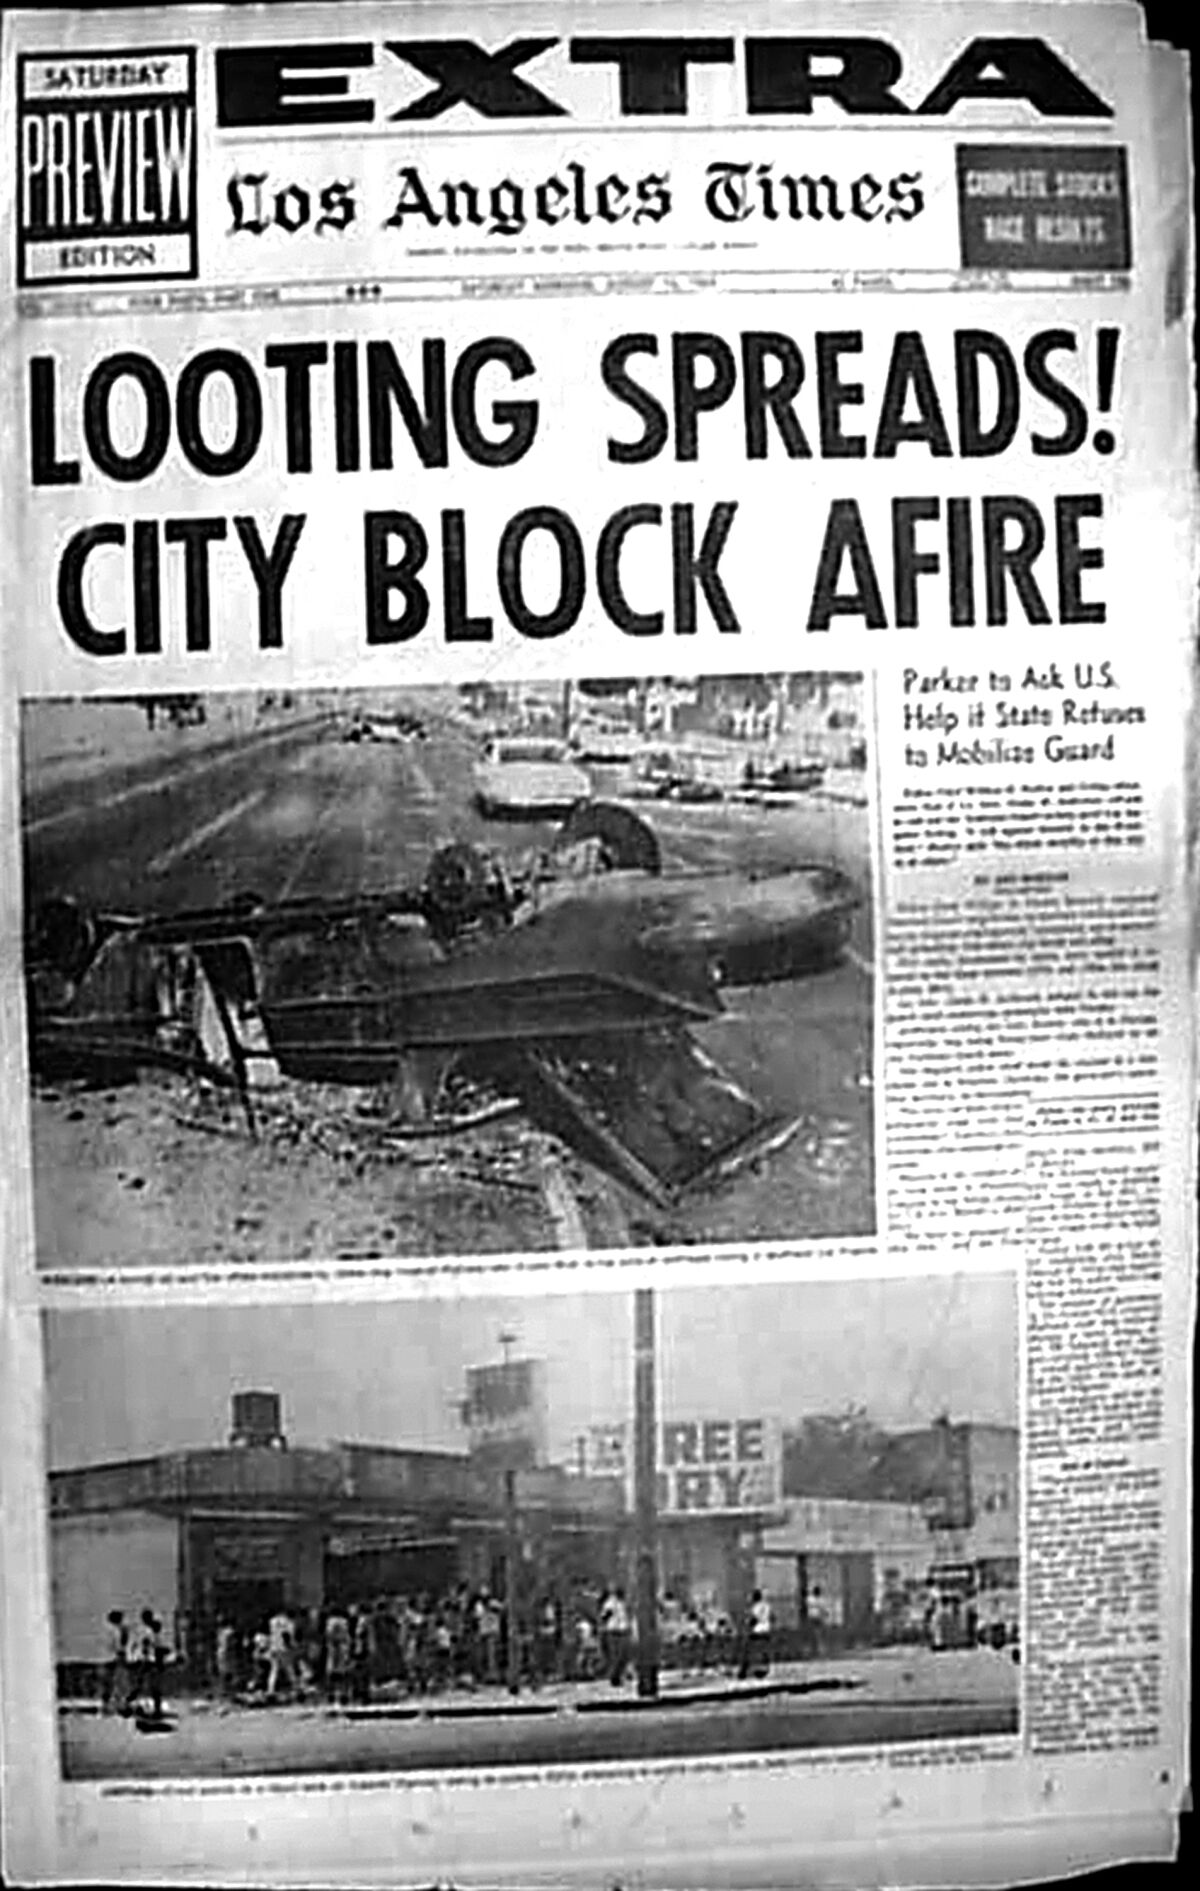 An old Los Angeles Times headline reads "Looting spreads! City block afire"